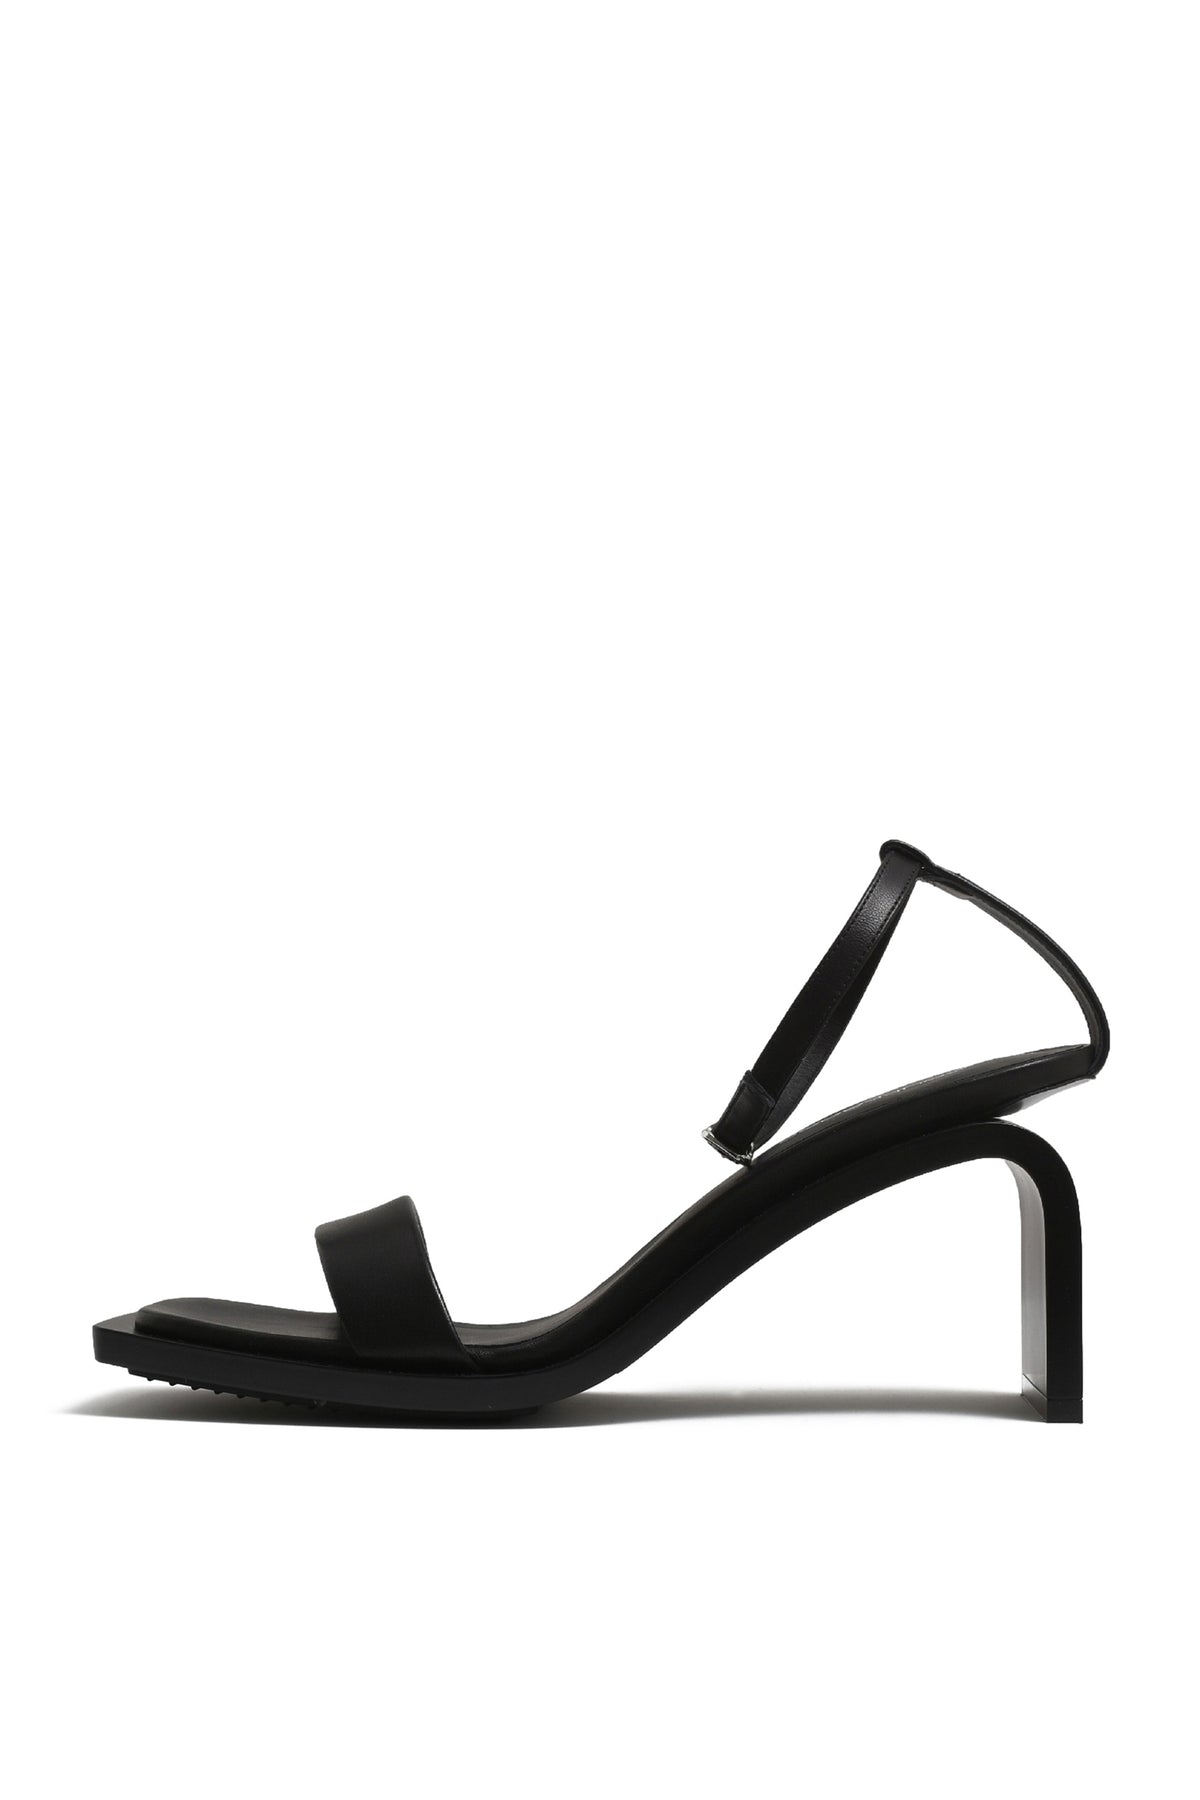 STREAM LEATHER SANDALS / BLK